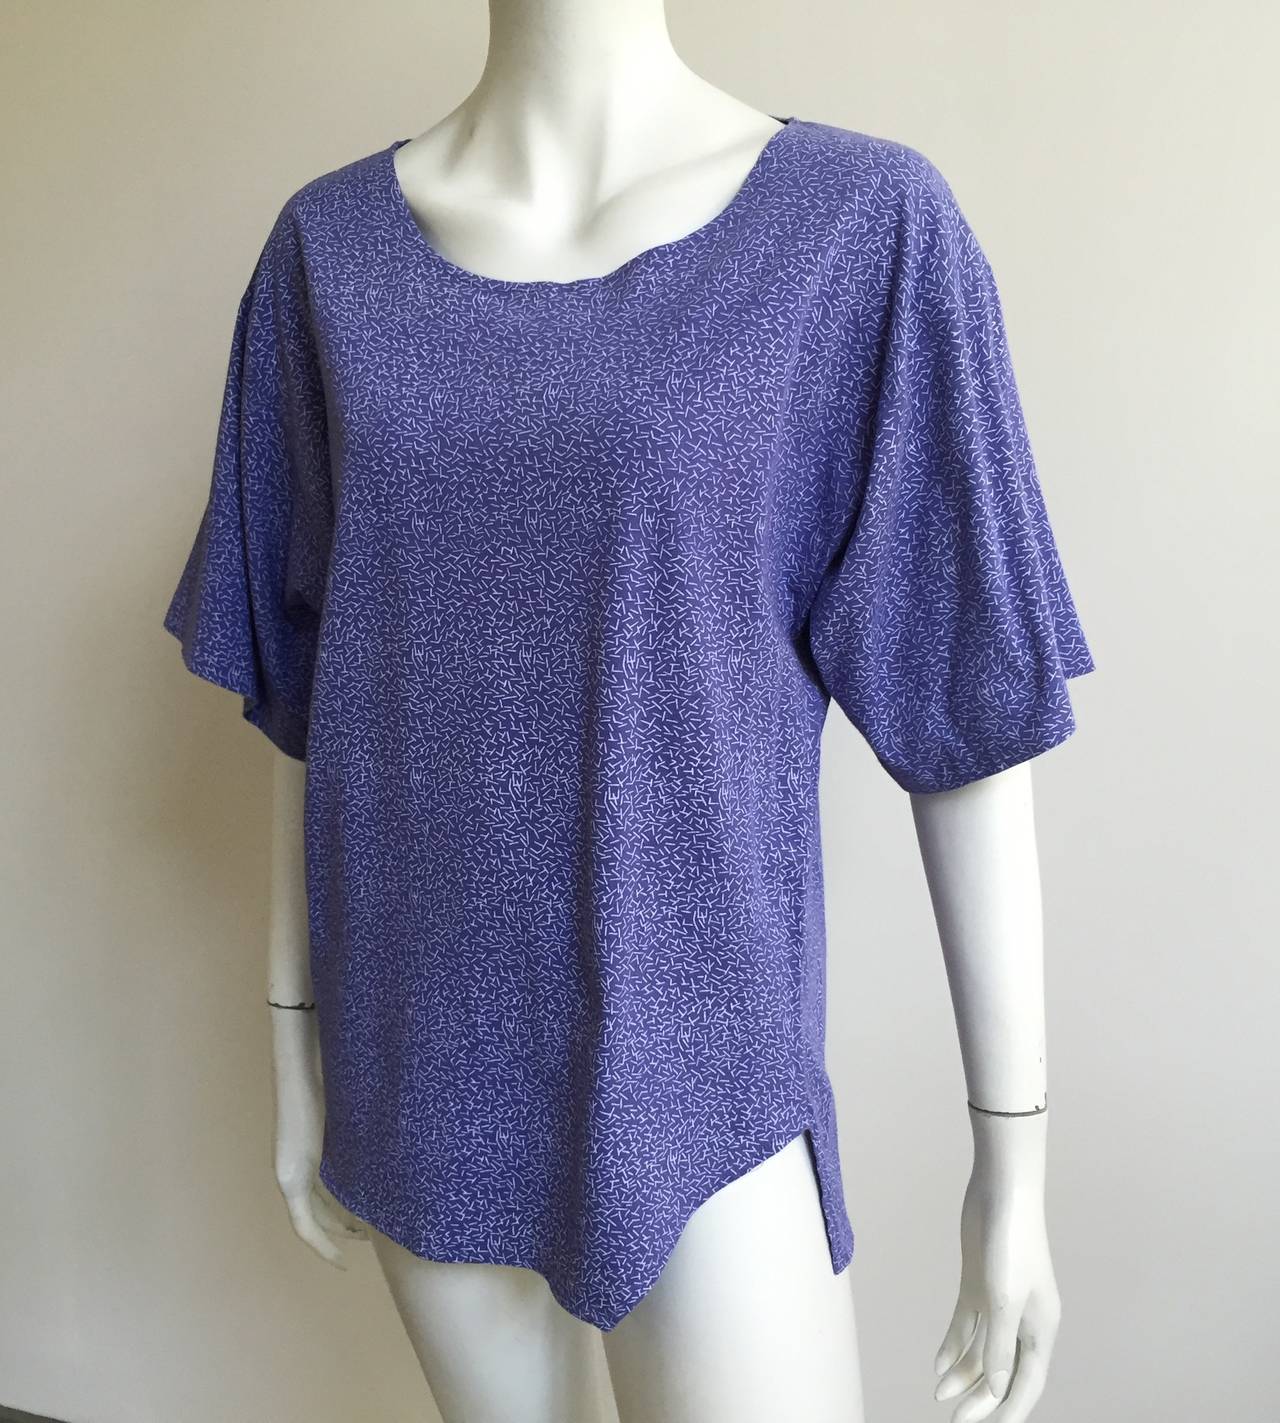 Willi Wear by Willi Smith 1984 cotton top size 2 on label but fits a perfect size 2 - 4 - 6 ( please see & use measurements). This item was purchased in 1984 at Willi Smith studio in NYC. Mr. Smith, who made inexpensivesportswear under the WilliWear